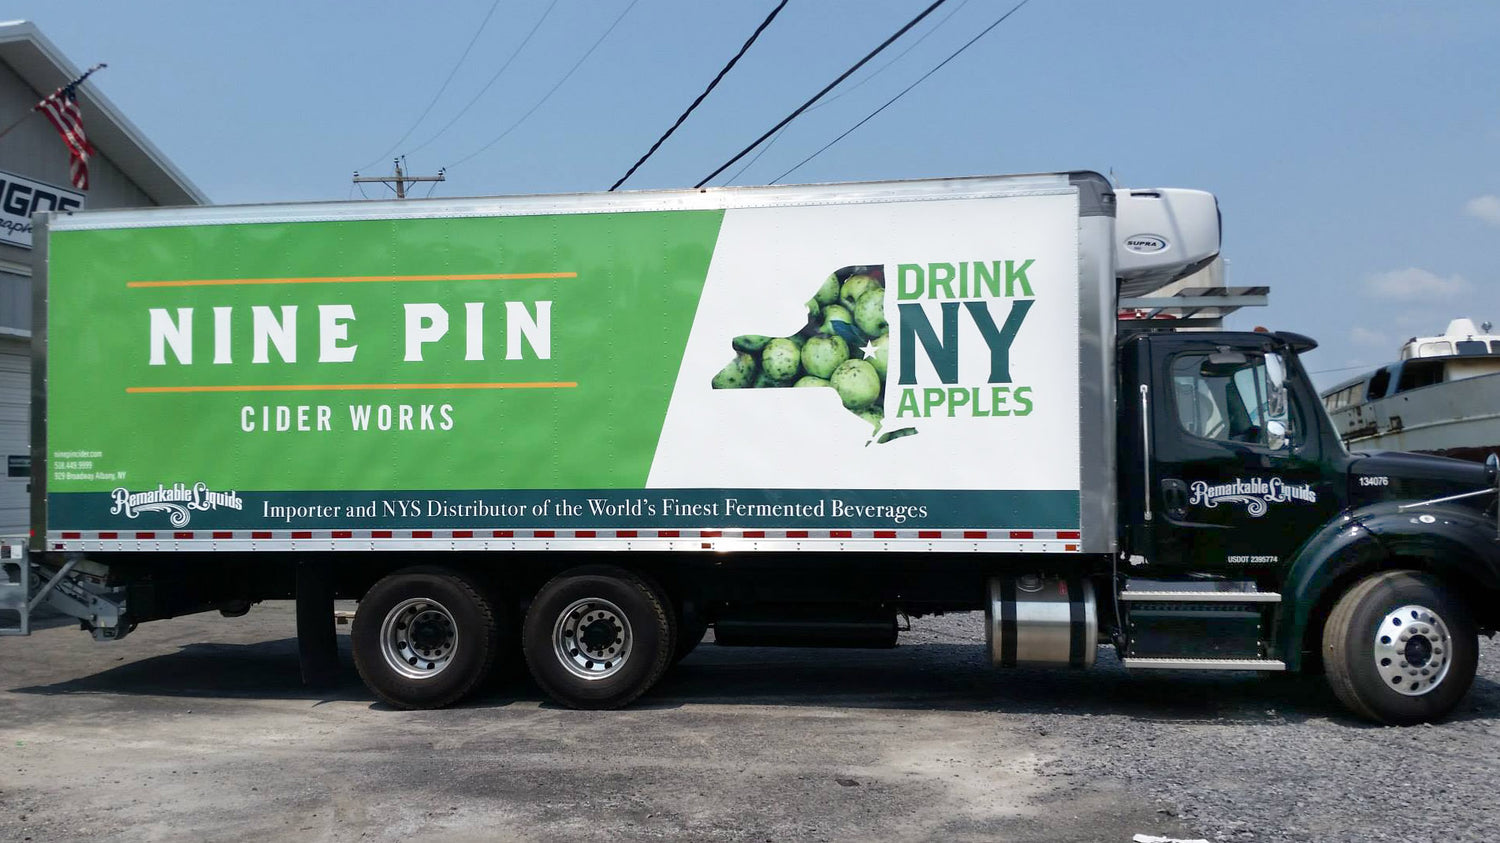 The fleet graphics installed on this box truck were printed and installed by All Signs & Graphics Inc.  A full wrap including rivets looks amazing printed on premium cast vinyl and laminated with clear UV protective layer for long lasting graphics.